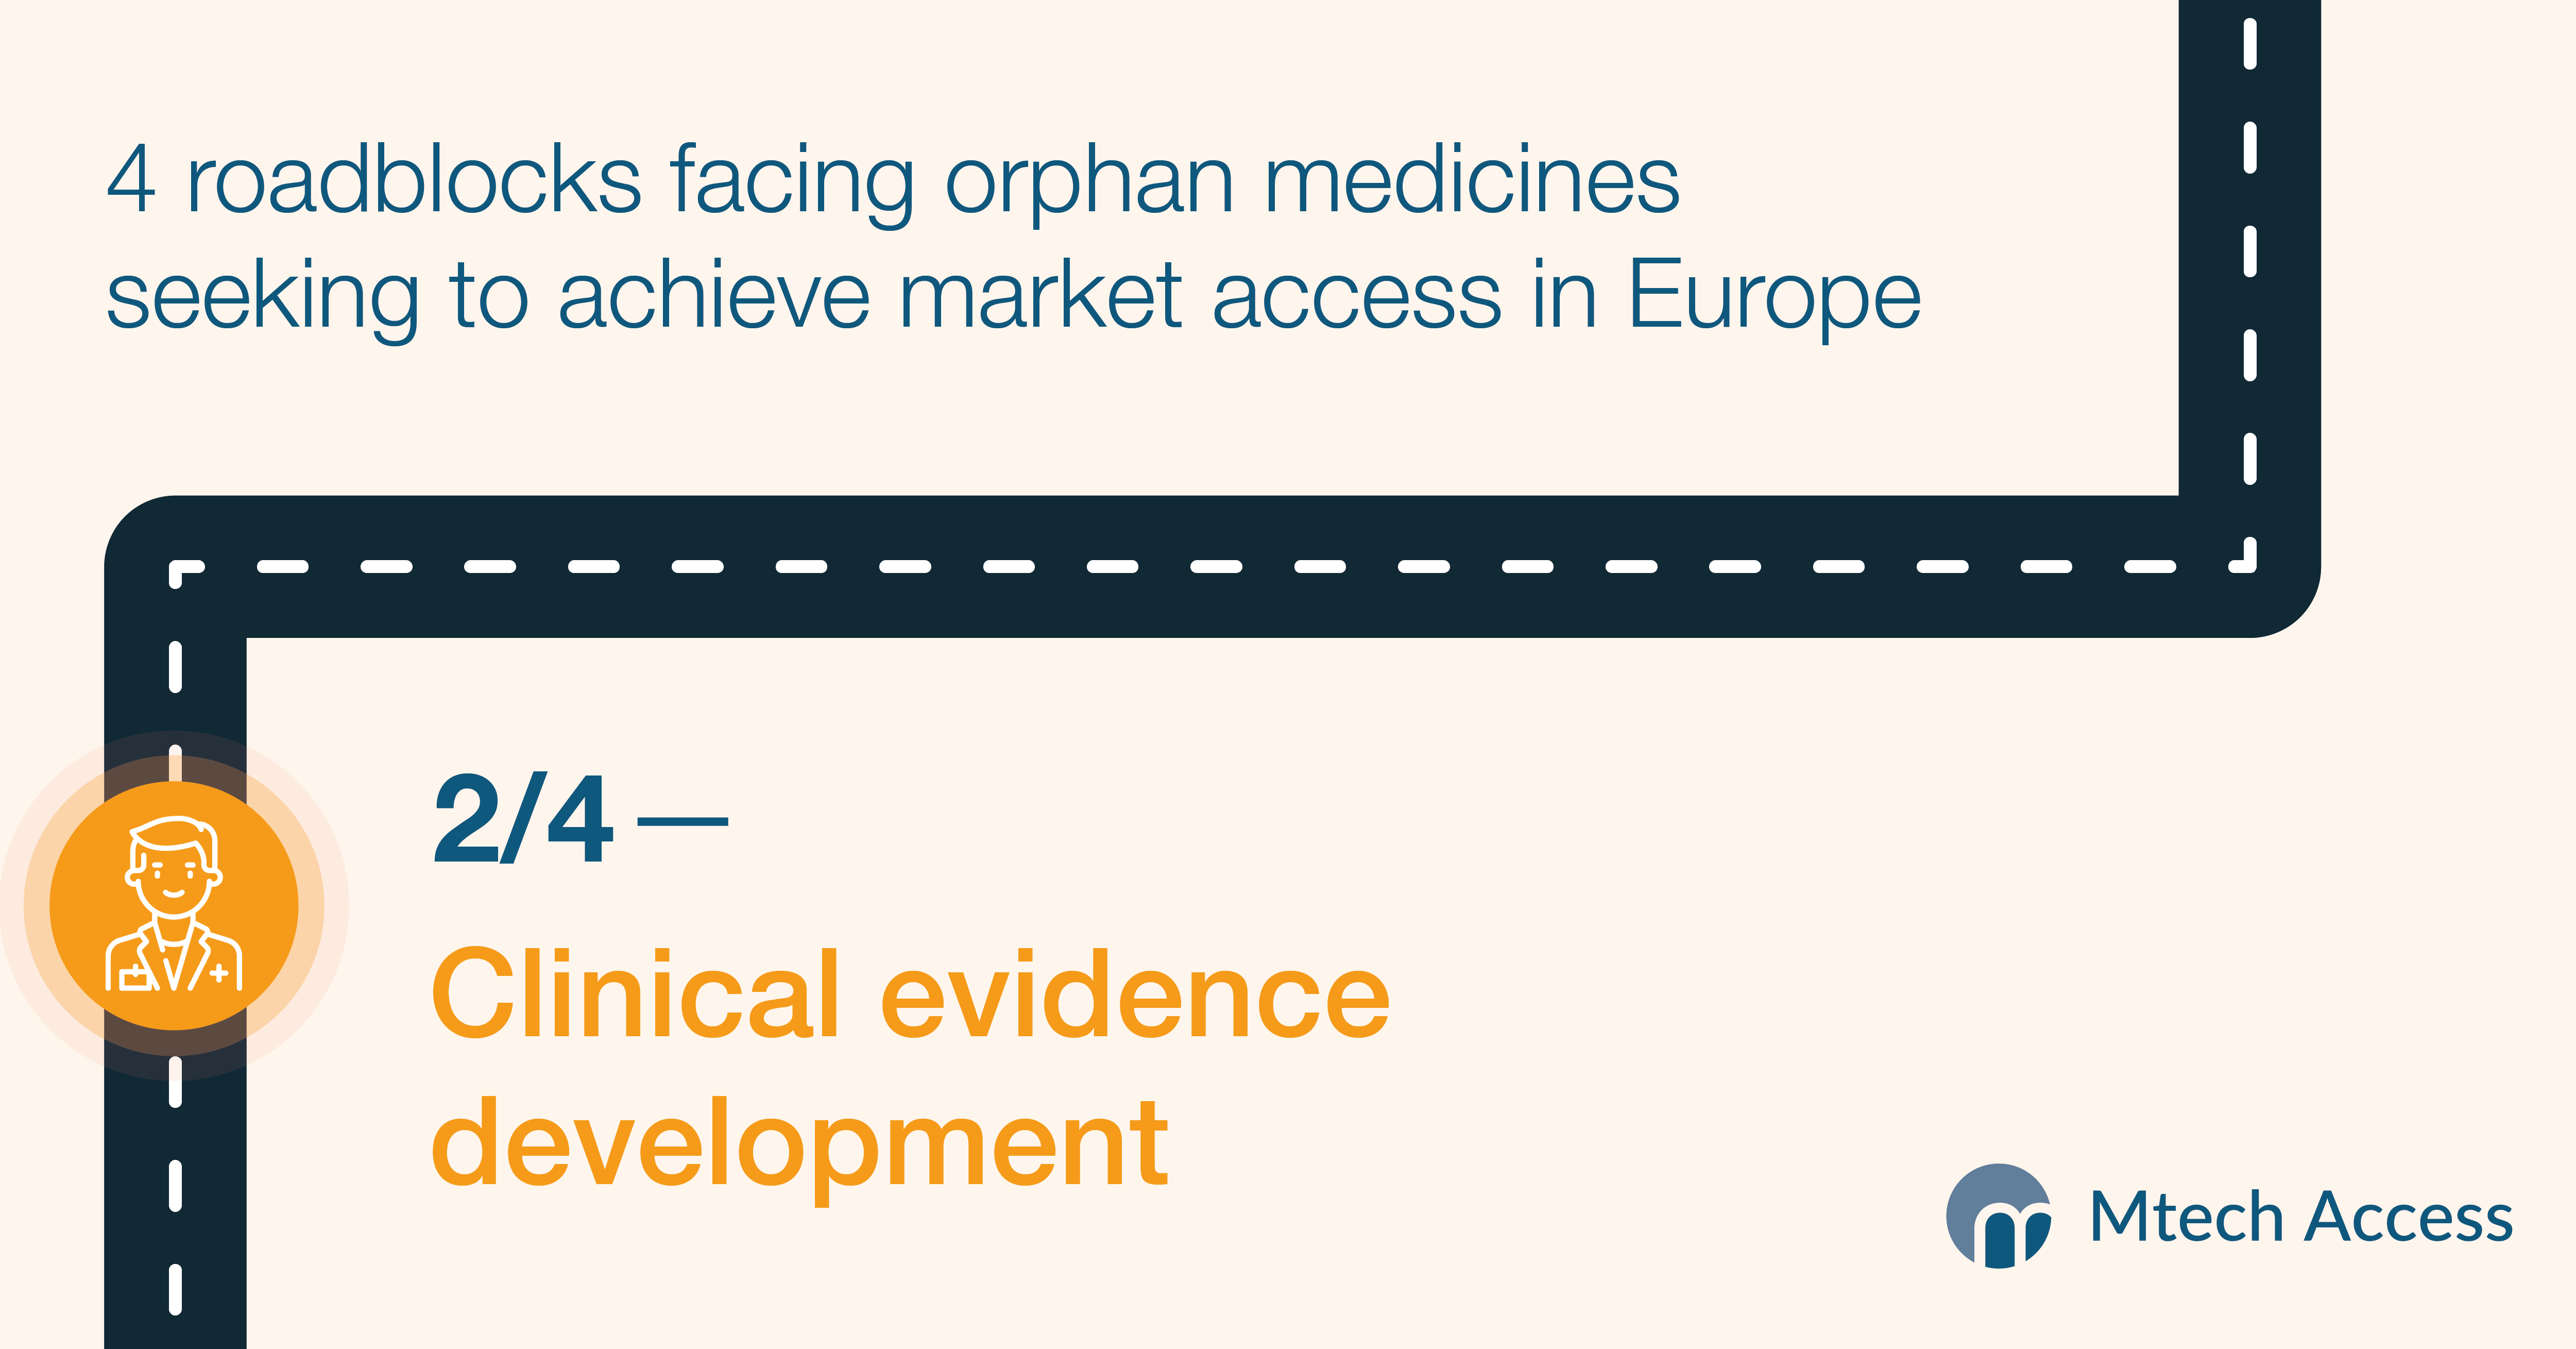 4 roadblocks facing orphan medicines seeking to achieve market access in Europe - Part 2 Clinical evidence development. From Mtech Access